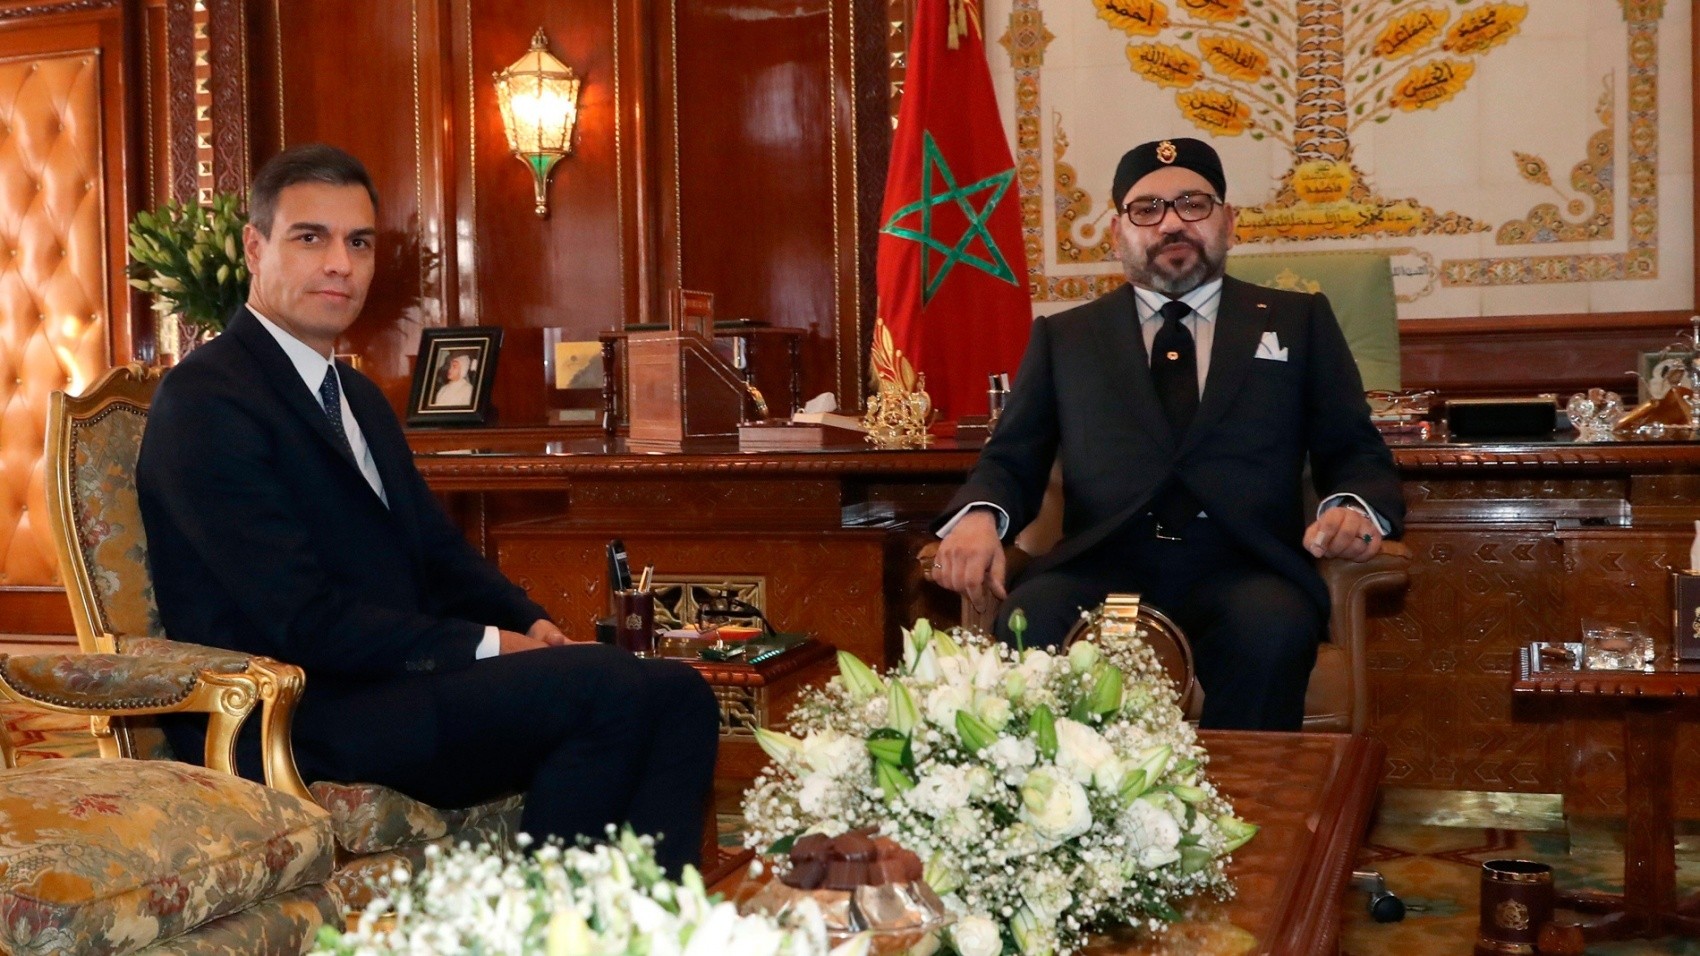 Moroccan king invites Spanish PM to visit the country